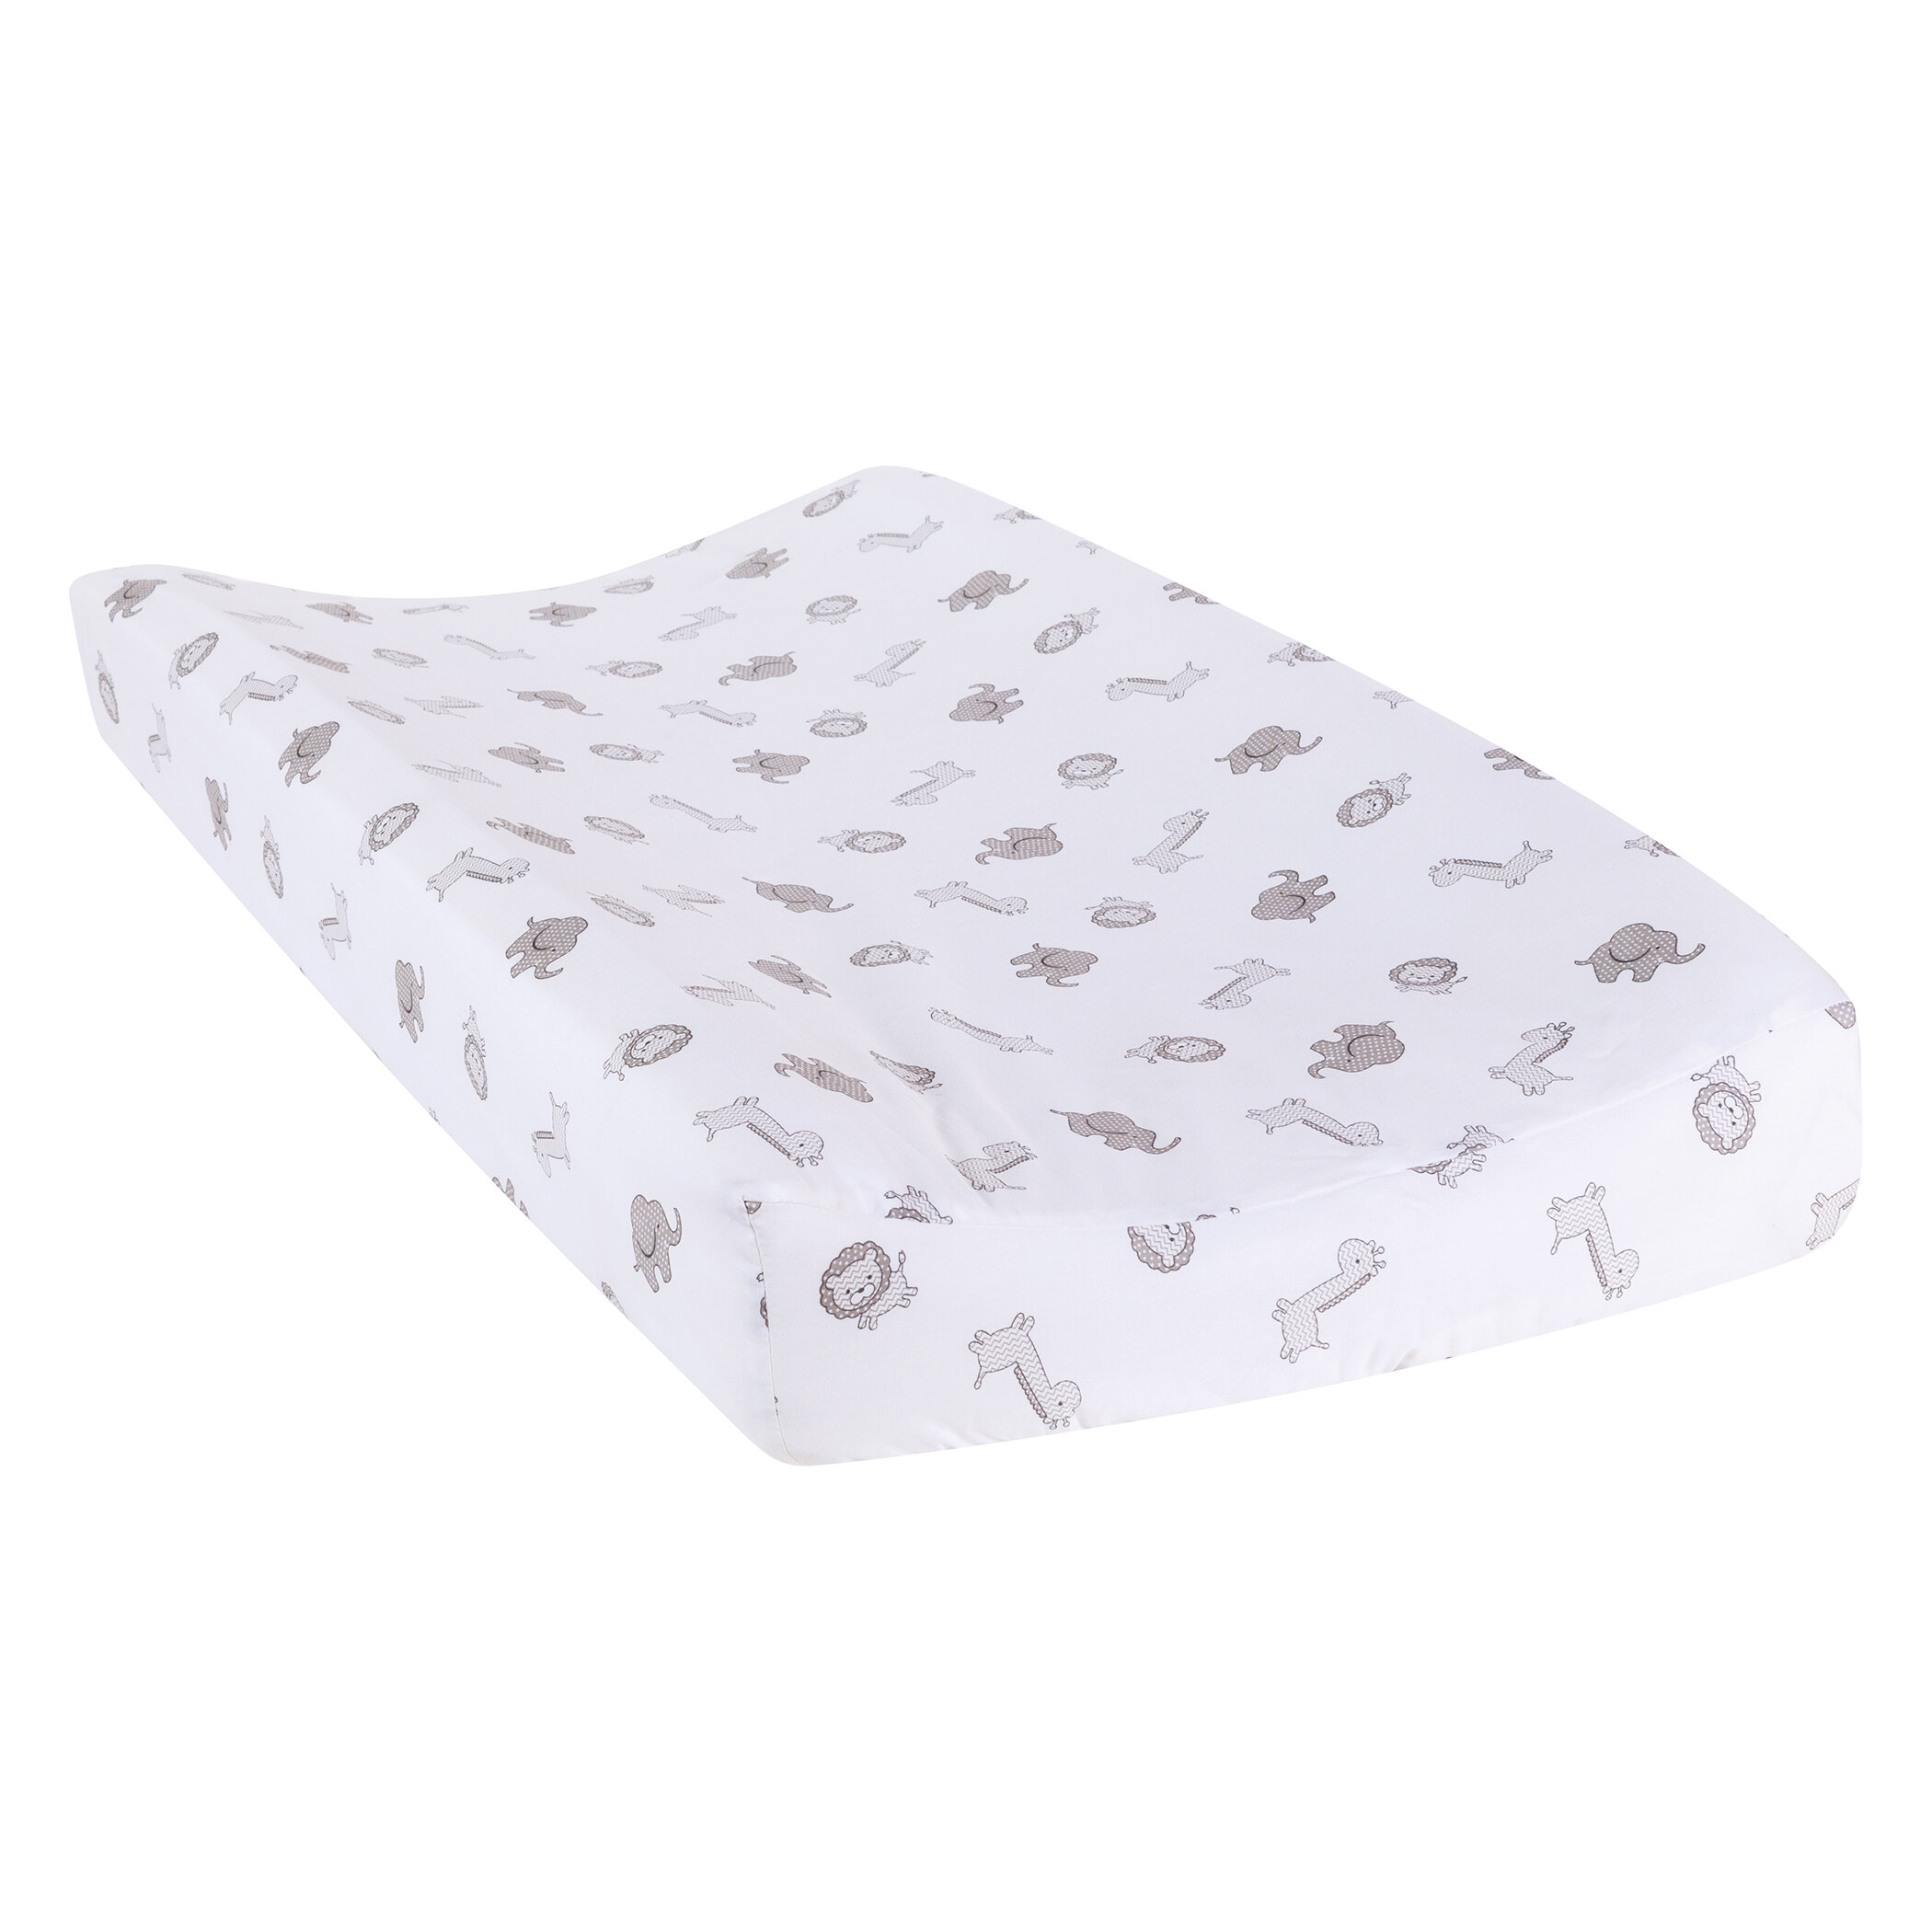 34 inch changing pad